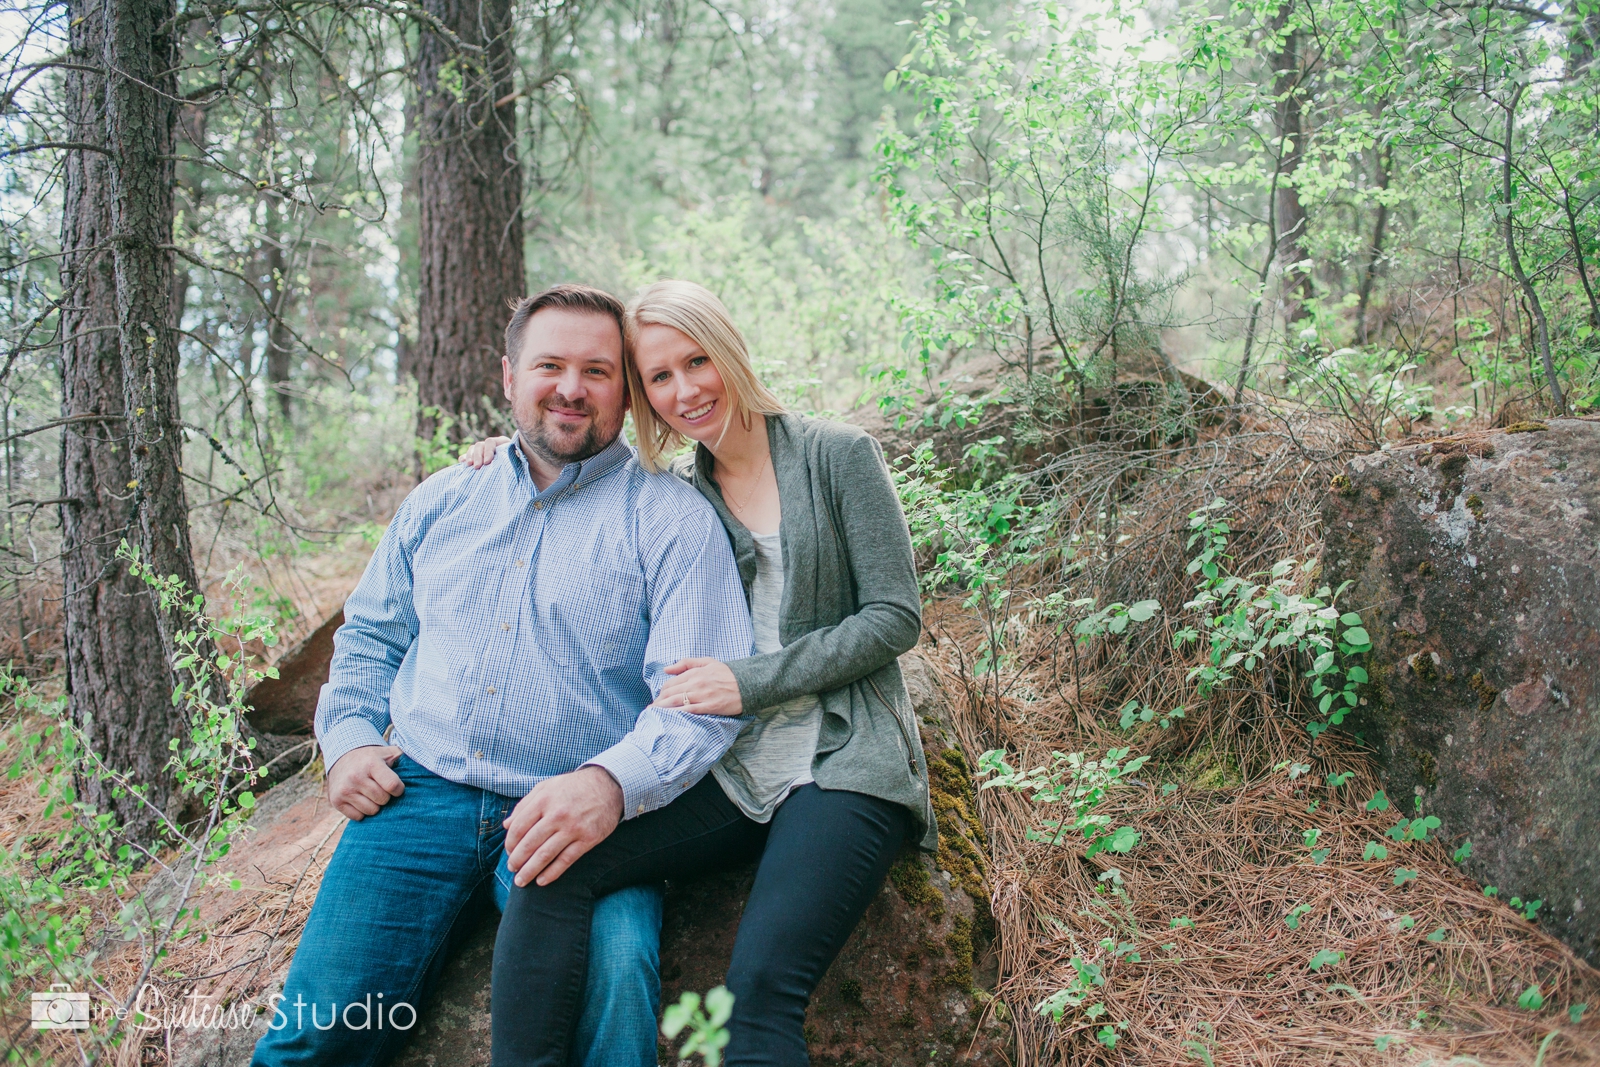 Bend, Oregon Lifestyle Wedding Photographer -  The Suitcase Studio - Engagement Photos at Big Eddy - Picnic in Deschutes Forest